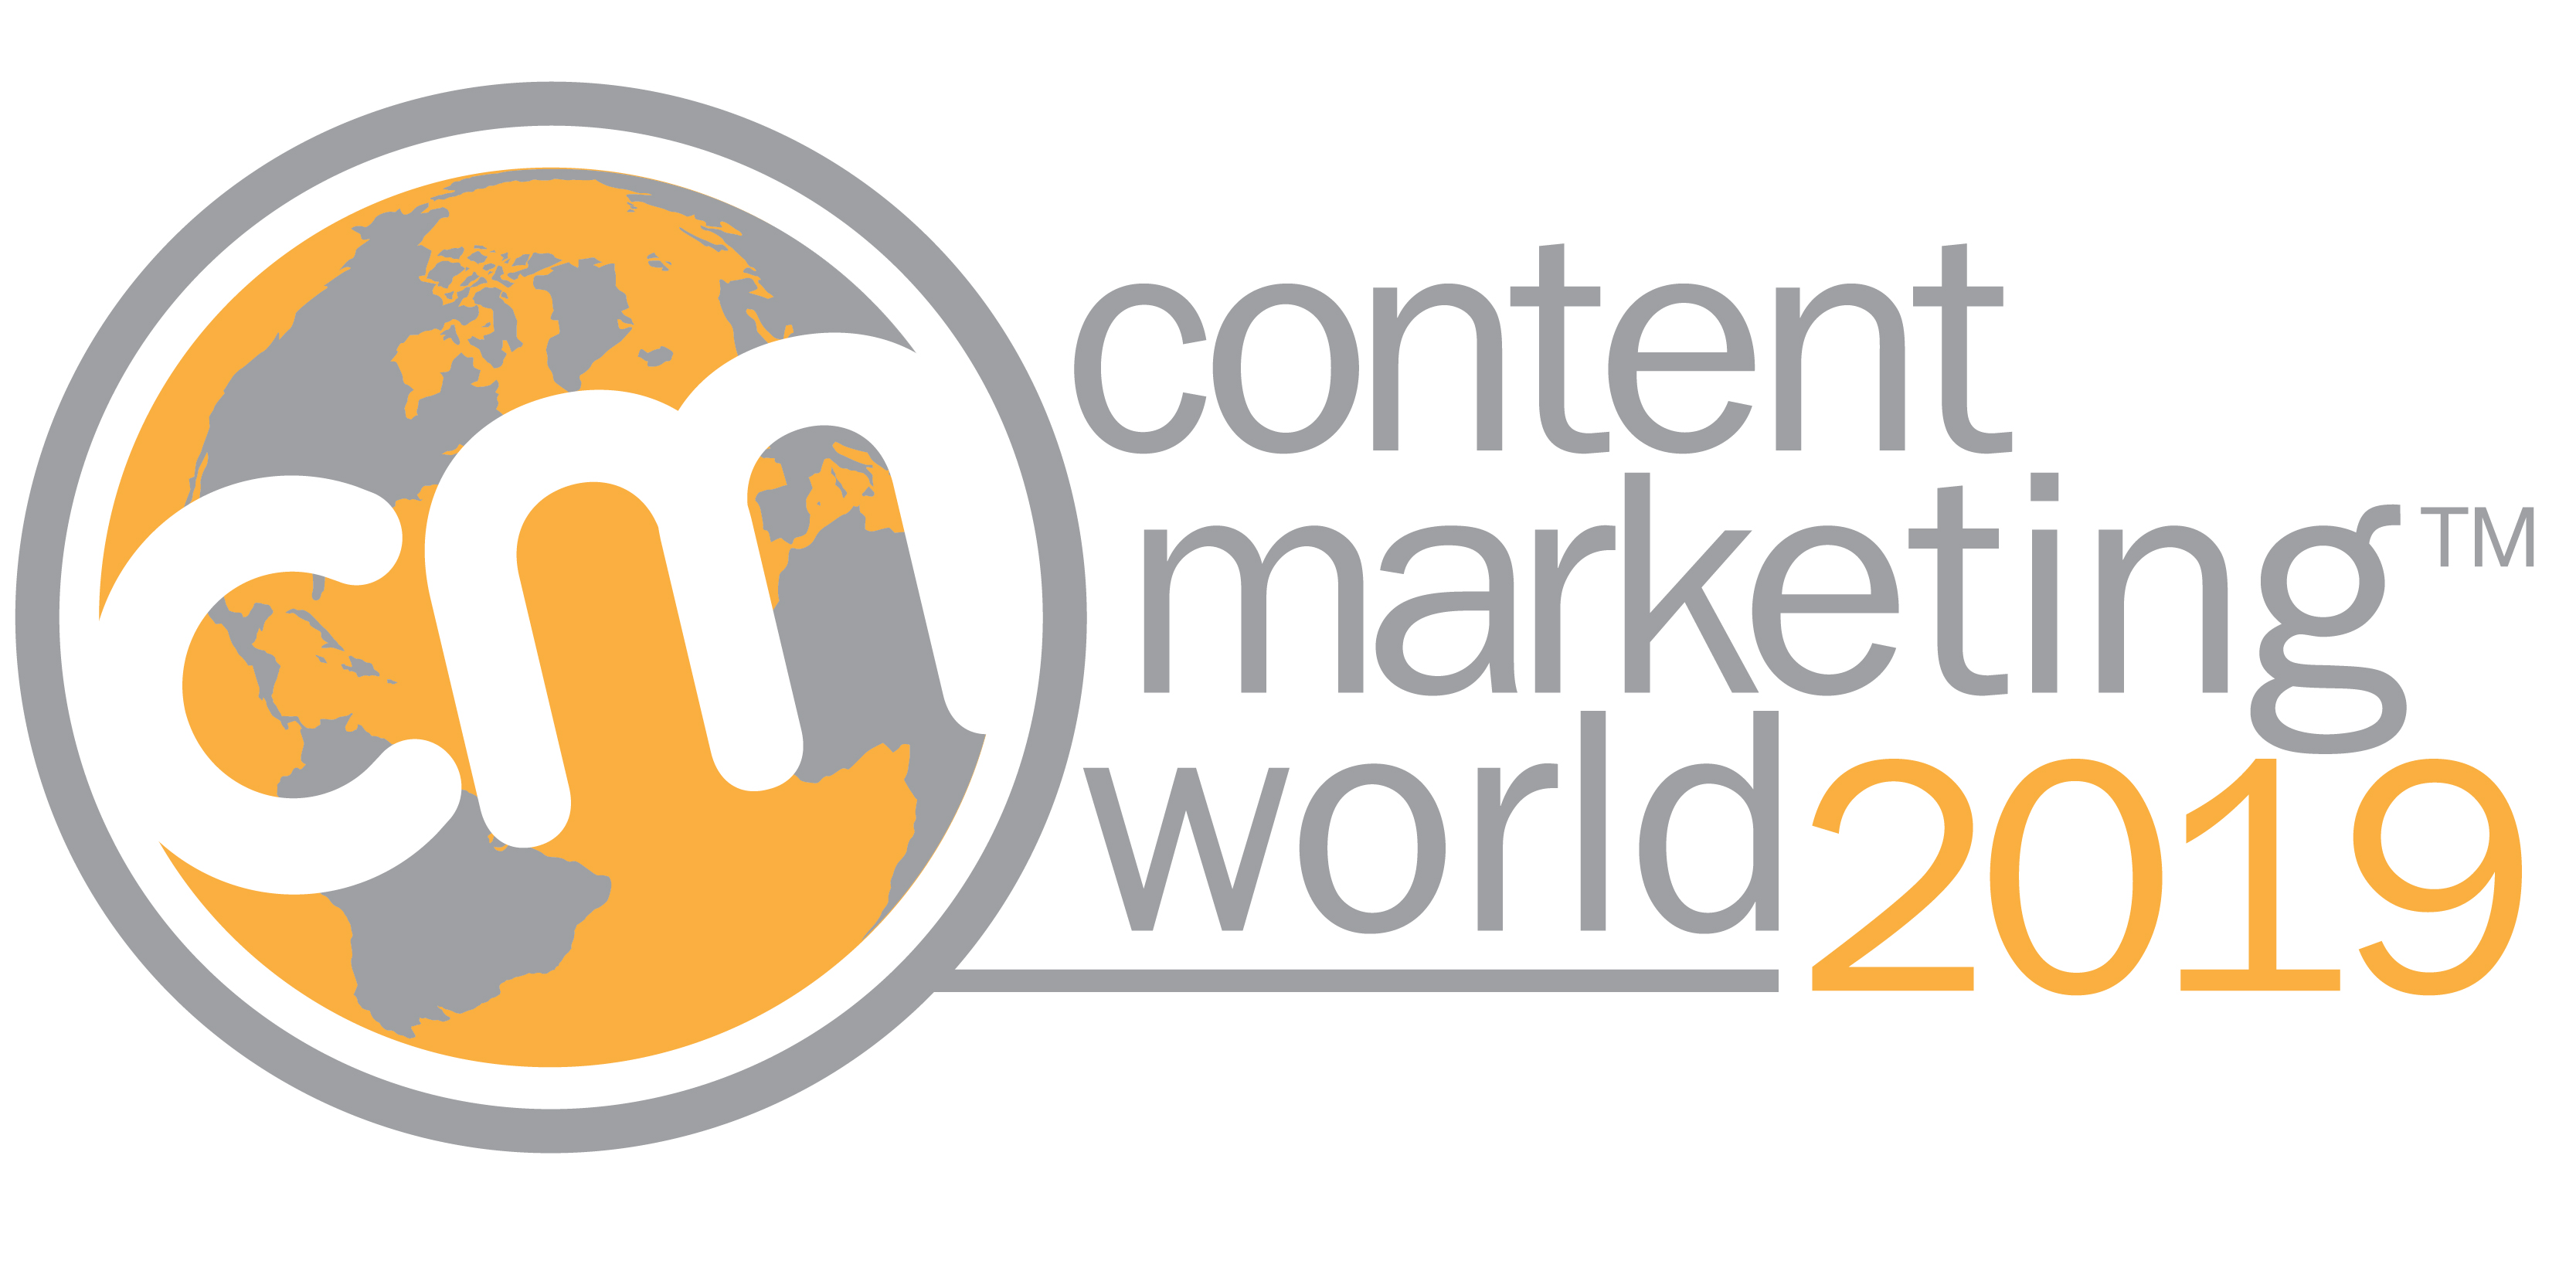 Registration Now Open for Content Marketing World 2019